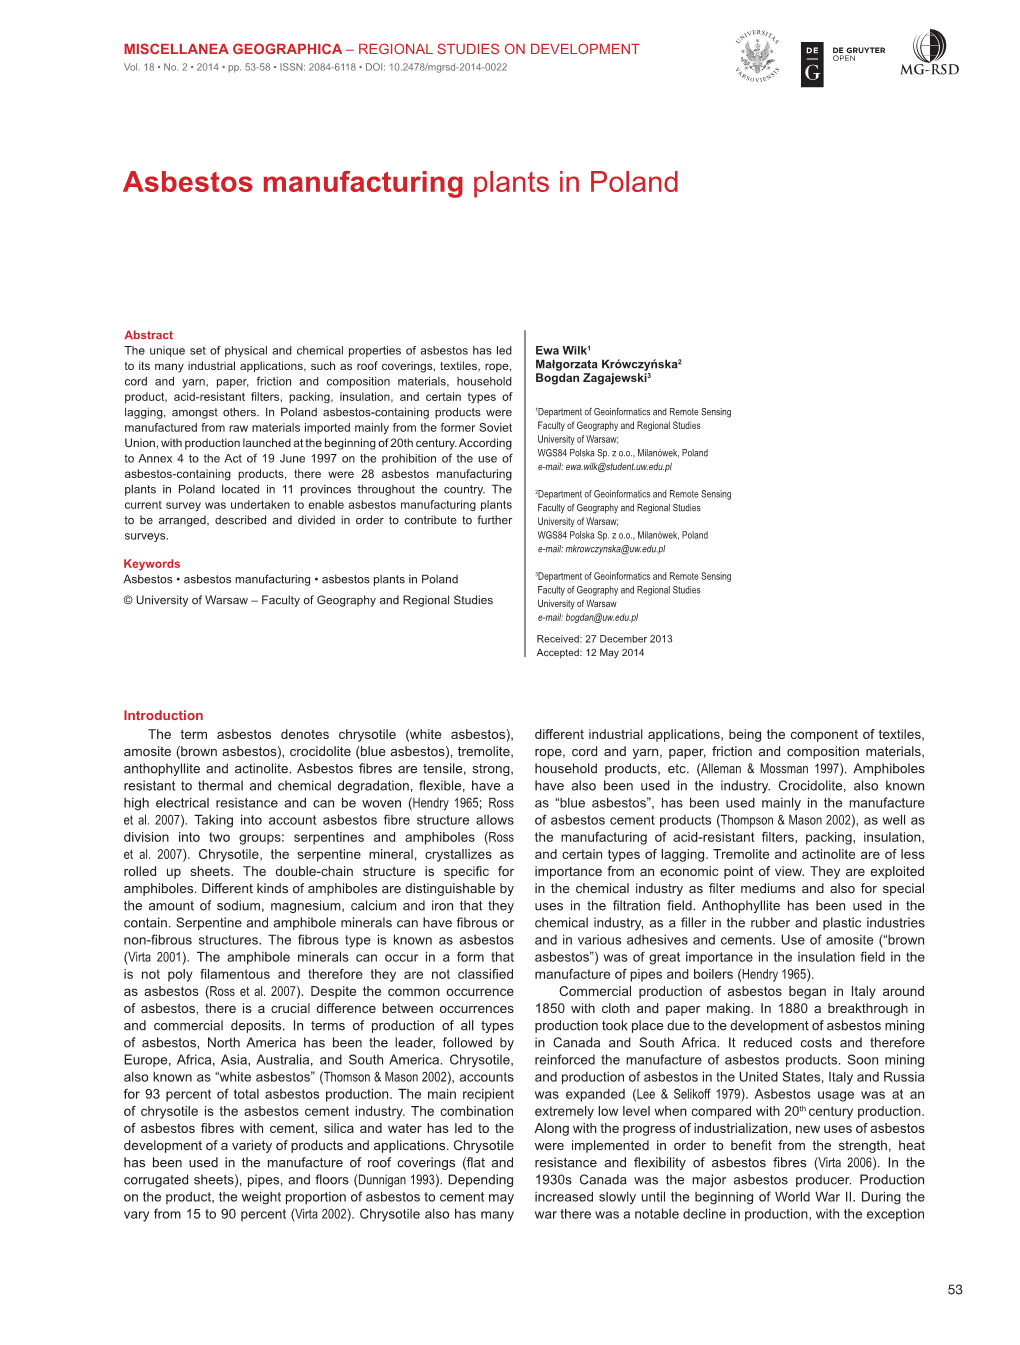 Asbestos Manufacturing Plants in Poland